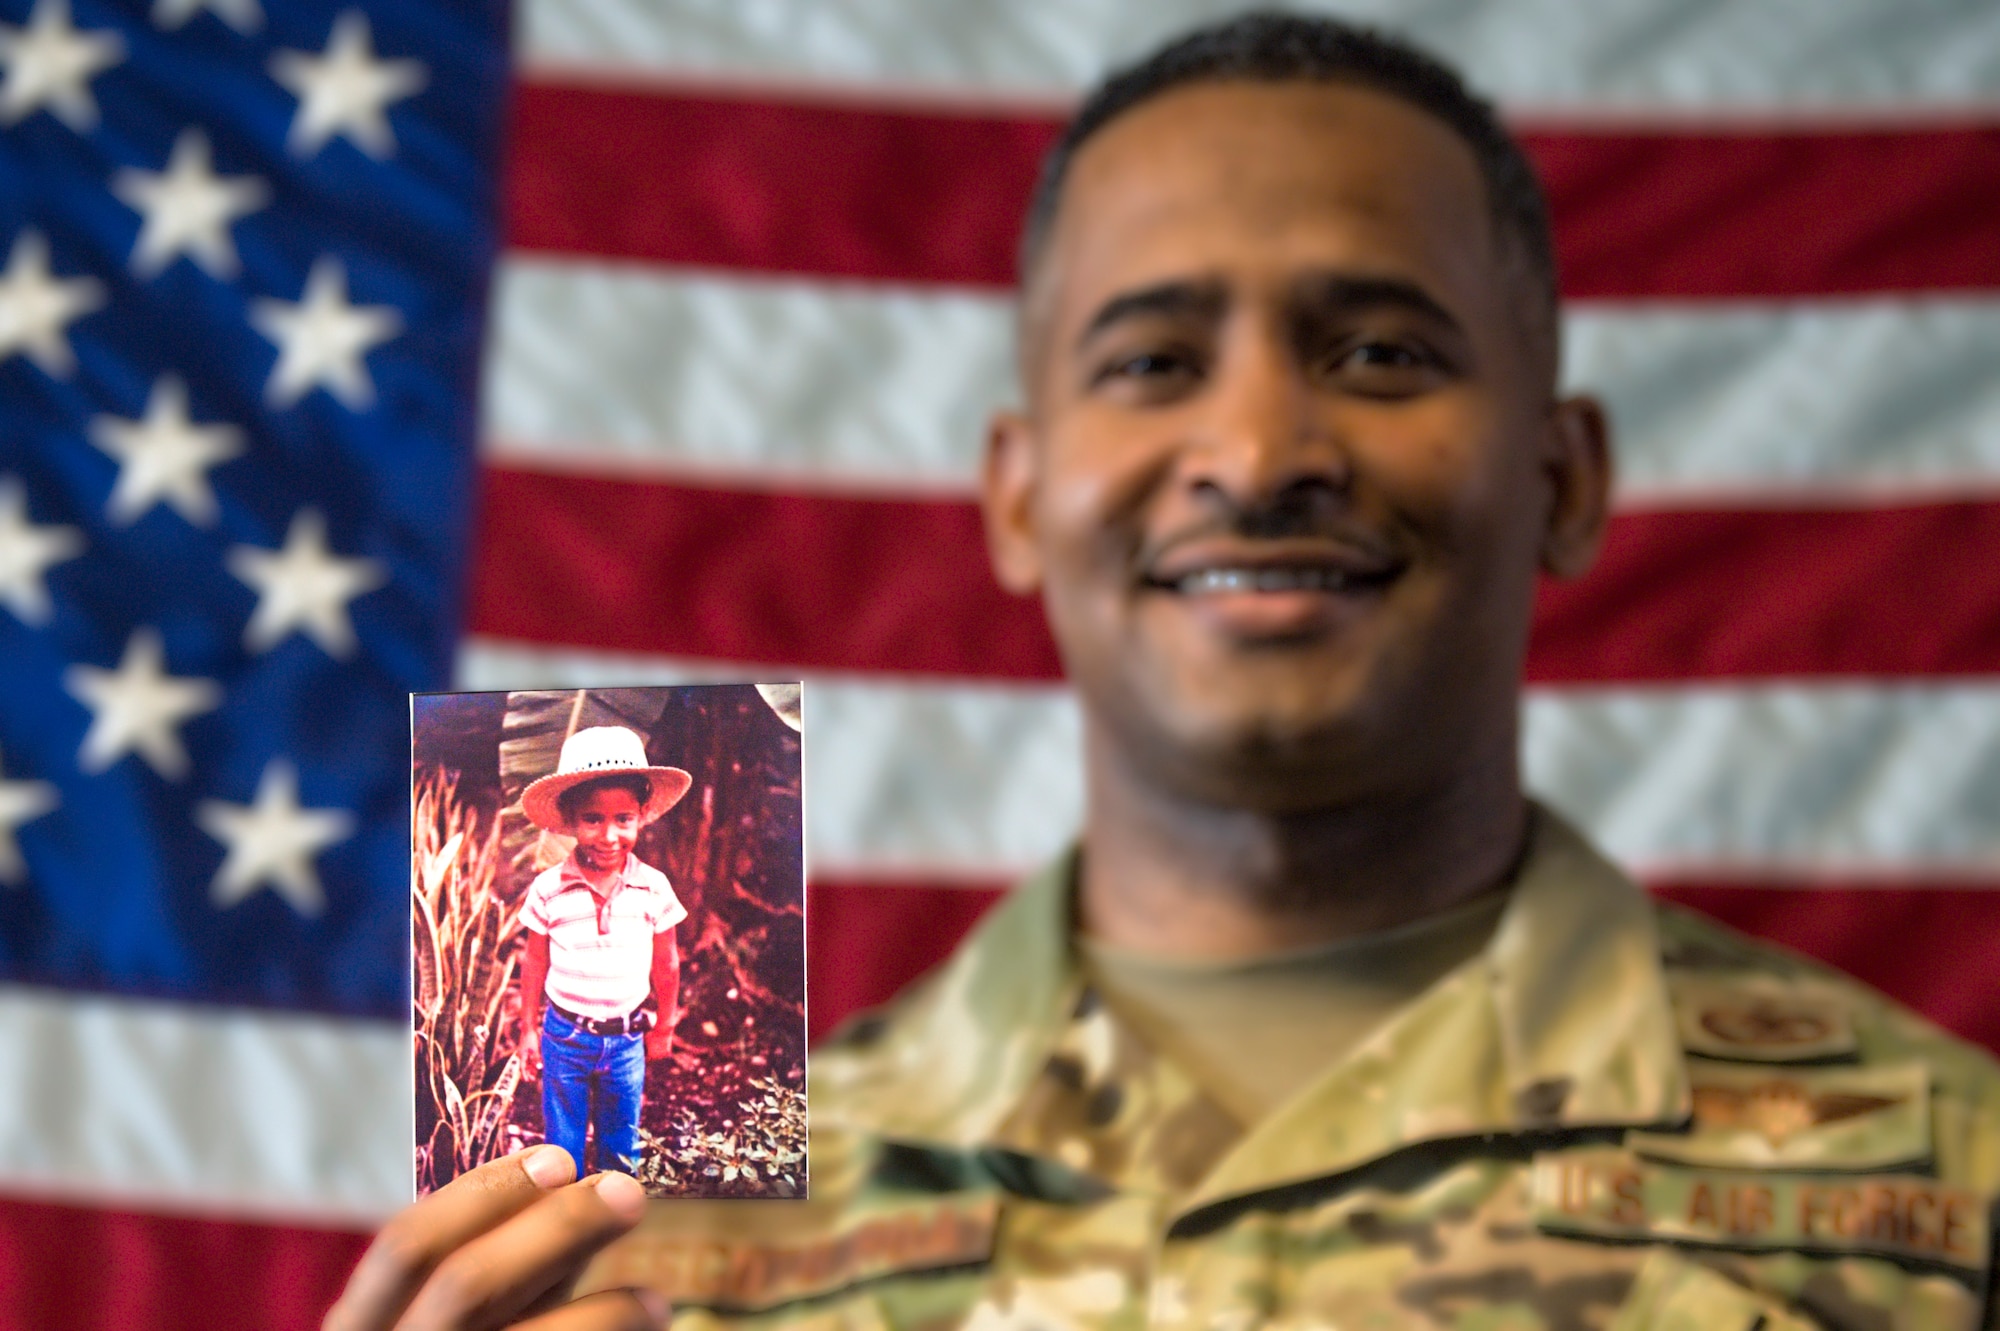 Tech. Sgt. Rafael Escoto Roa, 571st Mobility Support Advisory Squadron air transportation specialist air advisor, holds a picture of himself as a child, as he tells the story of his life in the Dominican Republic and how he moved to the United States in pursuit of the American dream. (U.S. Air Force photo by Tech. Sgt. Liliana Moreno)